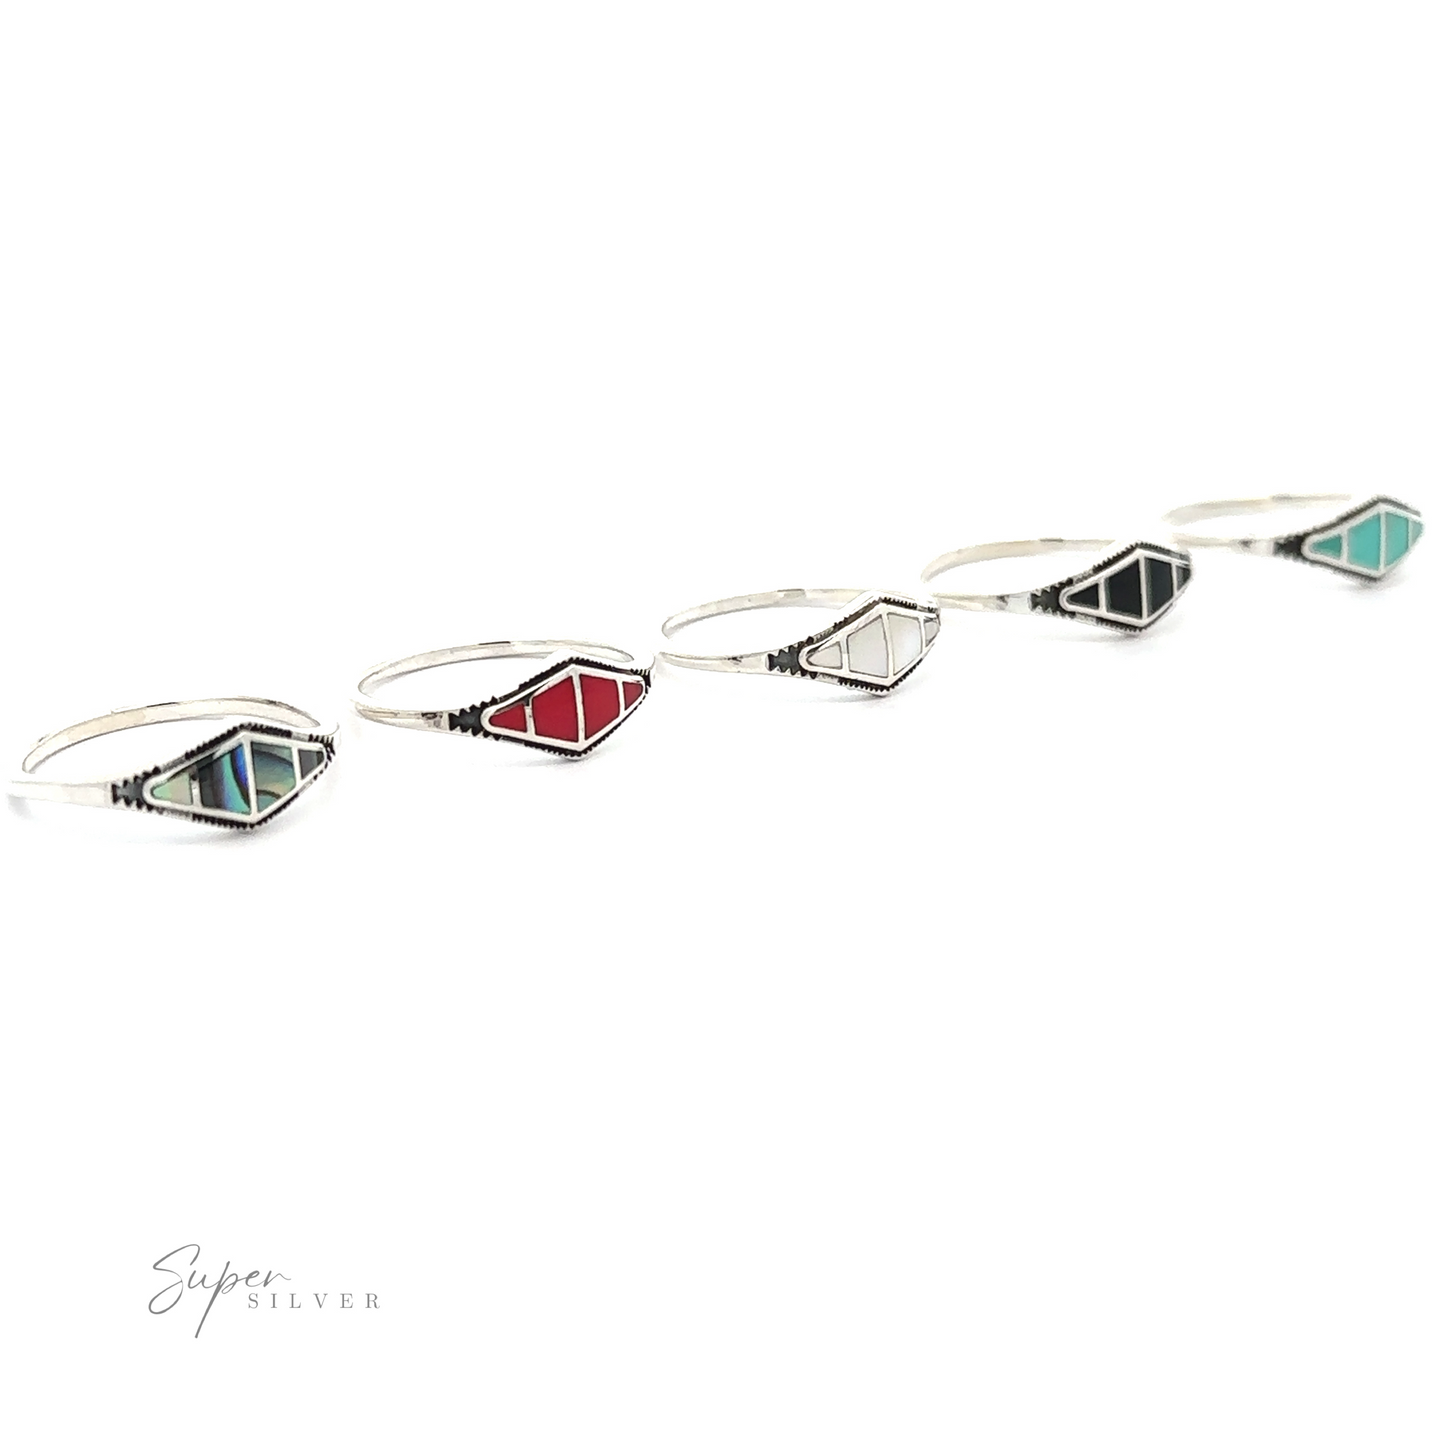 A row of Diamond Shape Sectioned Stone Rings with red, blue, and green stones, embodying unique fashion and contemporary trends.